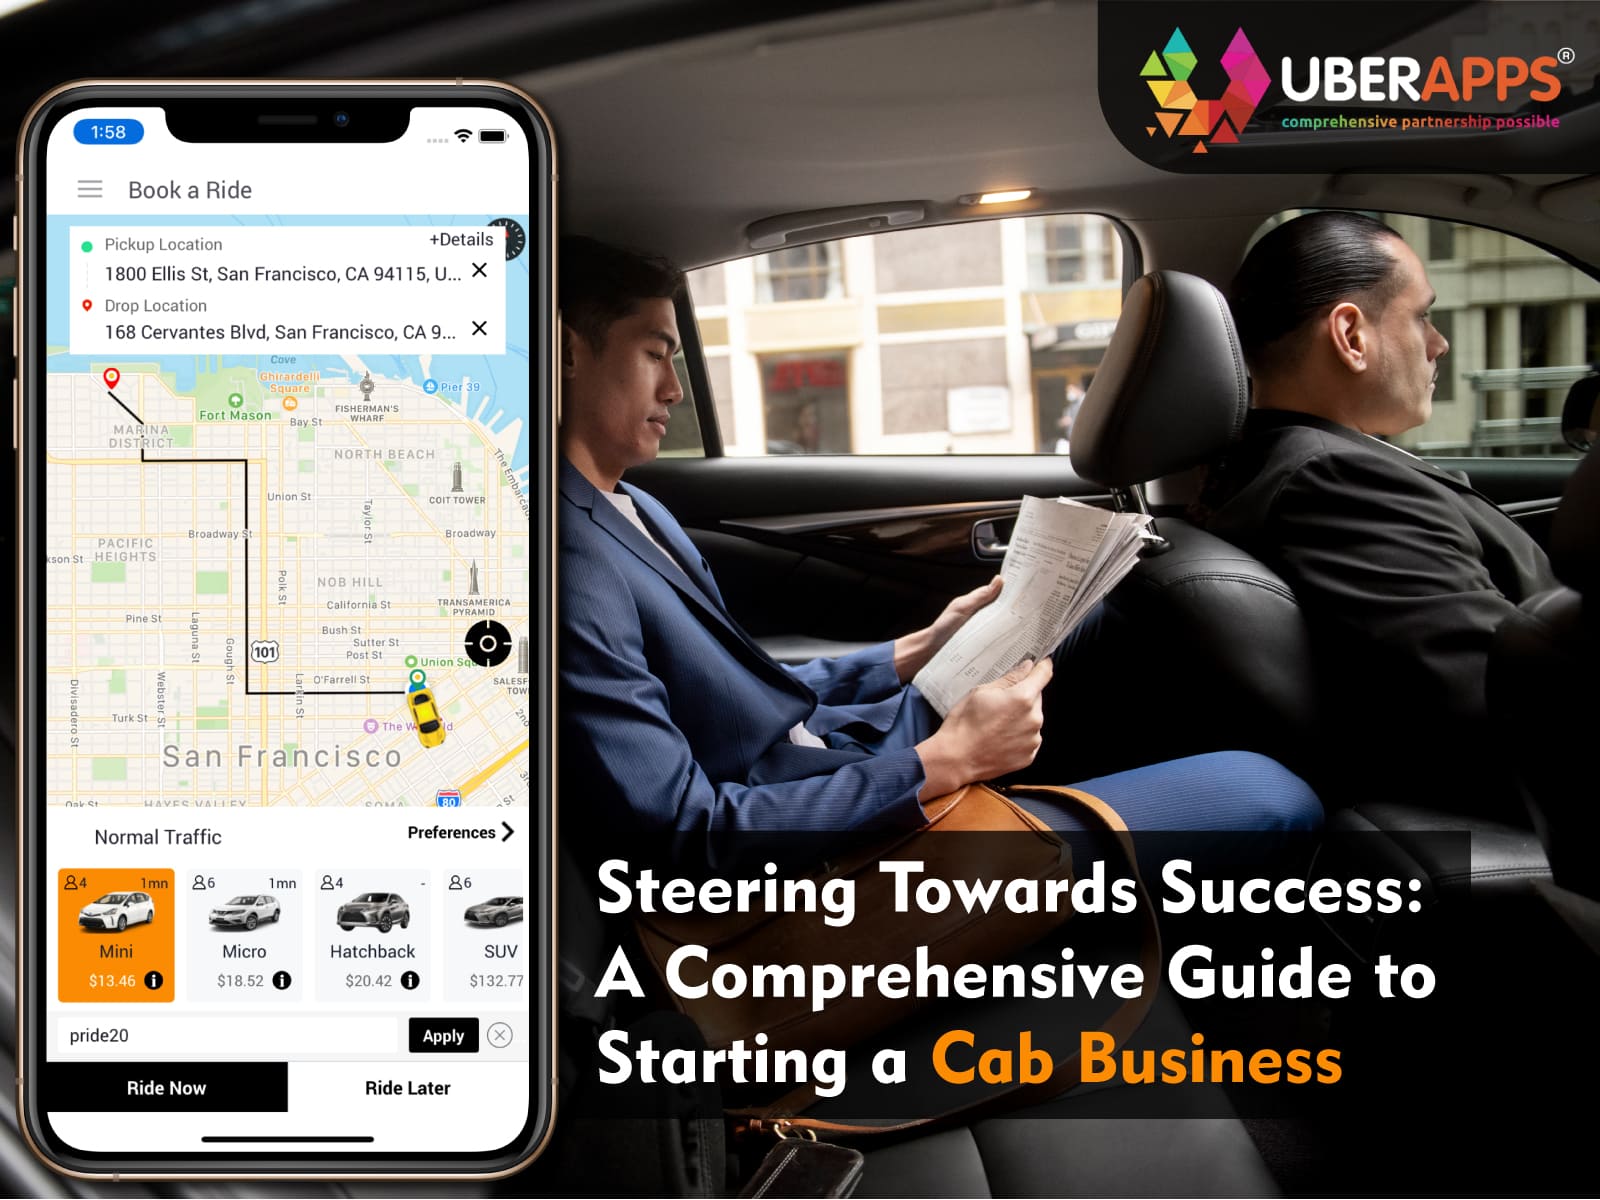 Steering Towards Success: A Comprehensive Guide to Starting a Cab Business